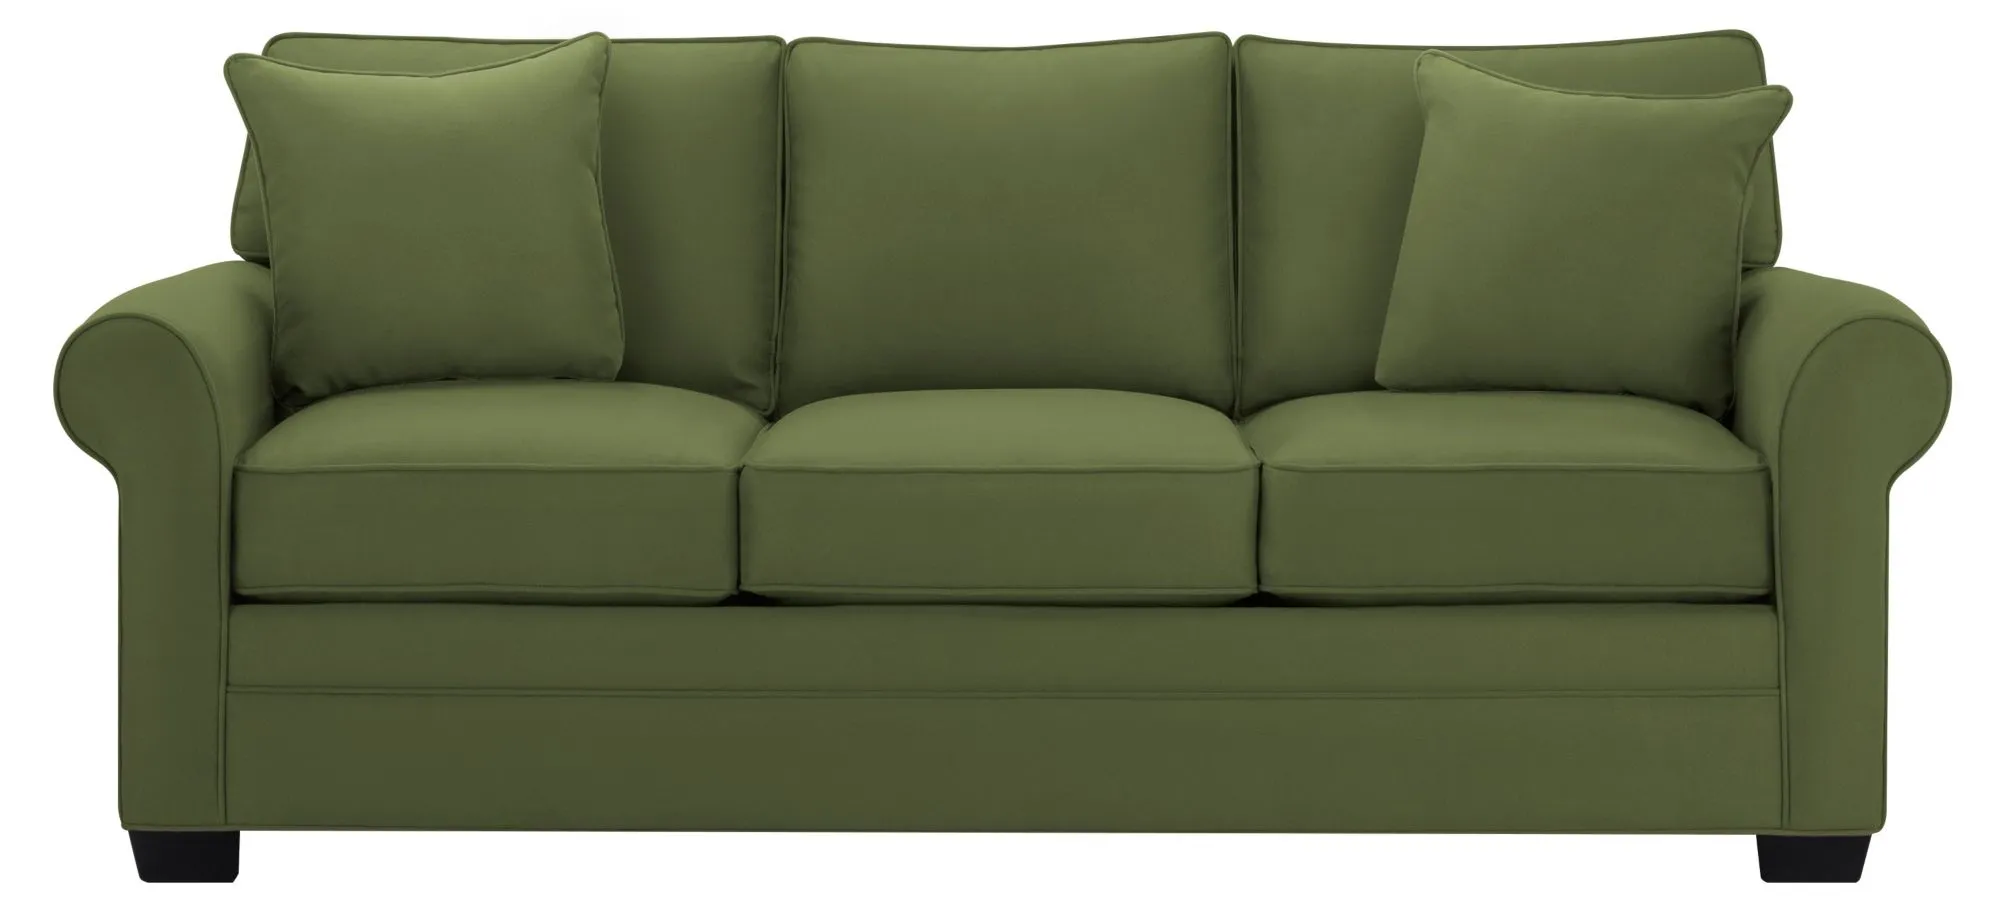 Glendora Sofa in Suede So Soft Pine by H.M. Richards